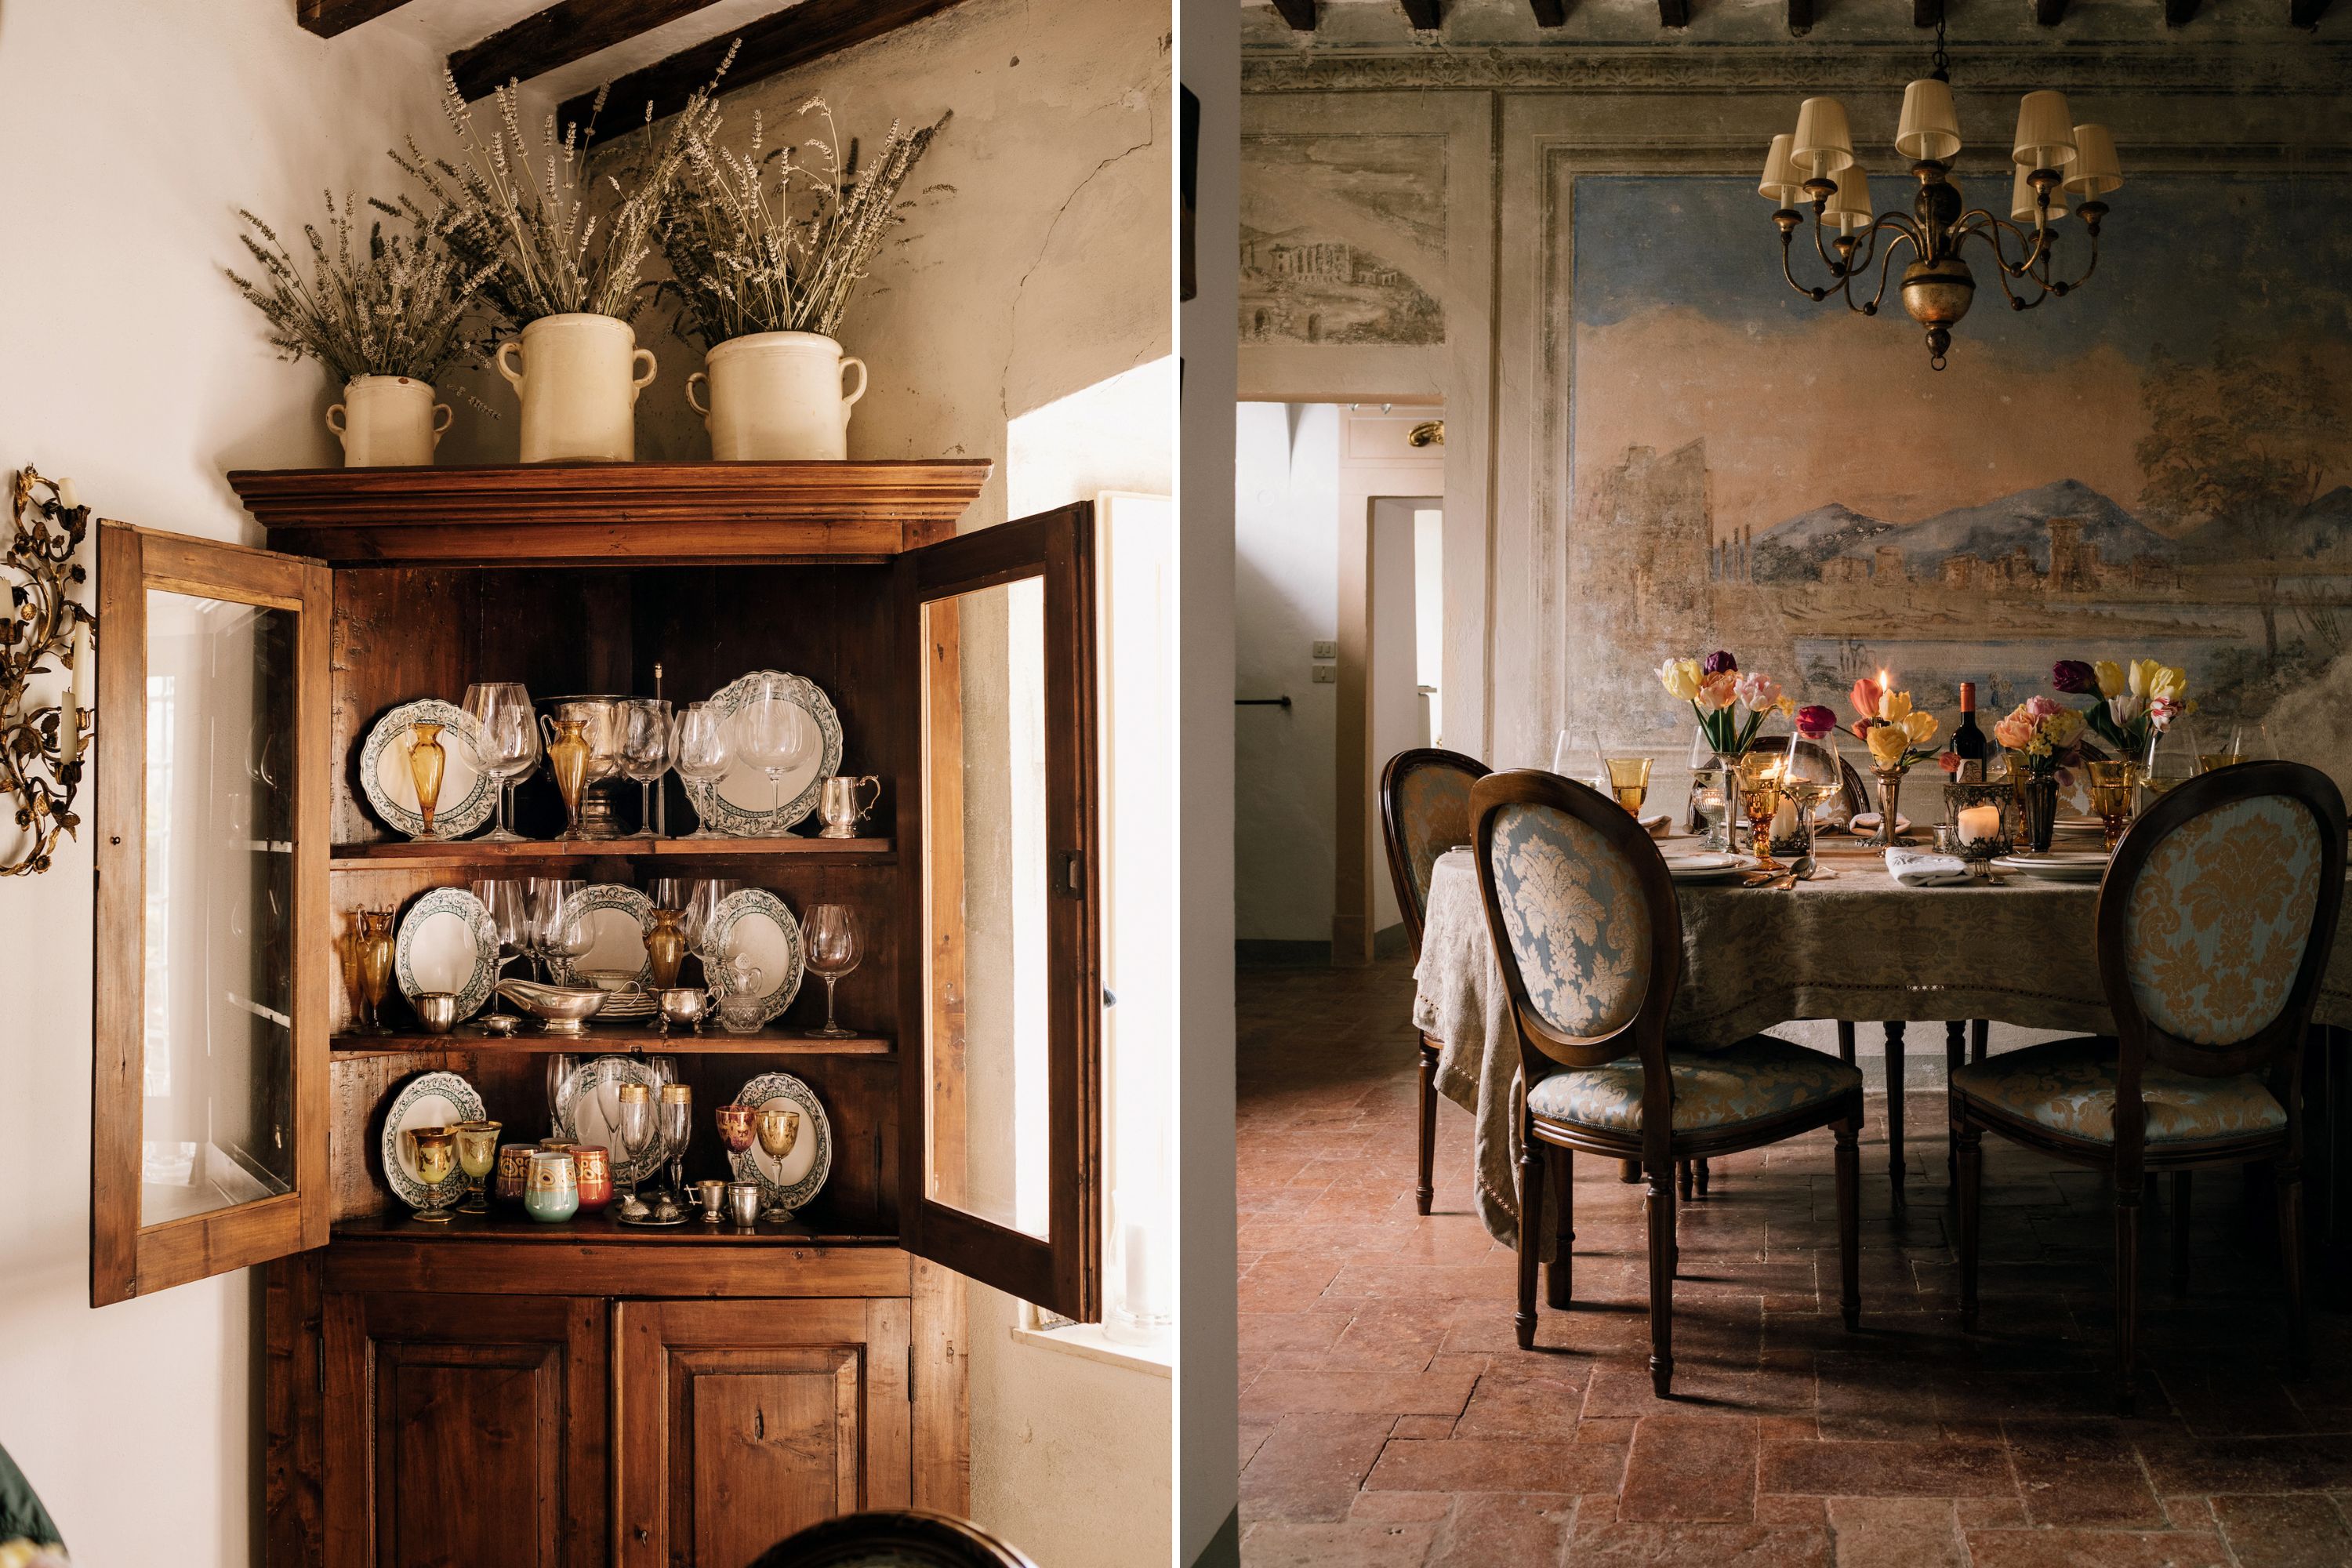 An antique cupboard with vintage glassware; a dining room set for dinner with a fresco on the wall of a mountain landscape.